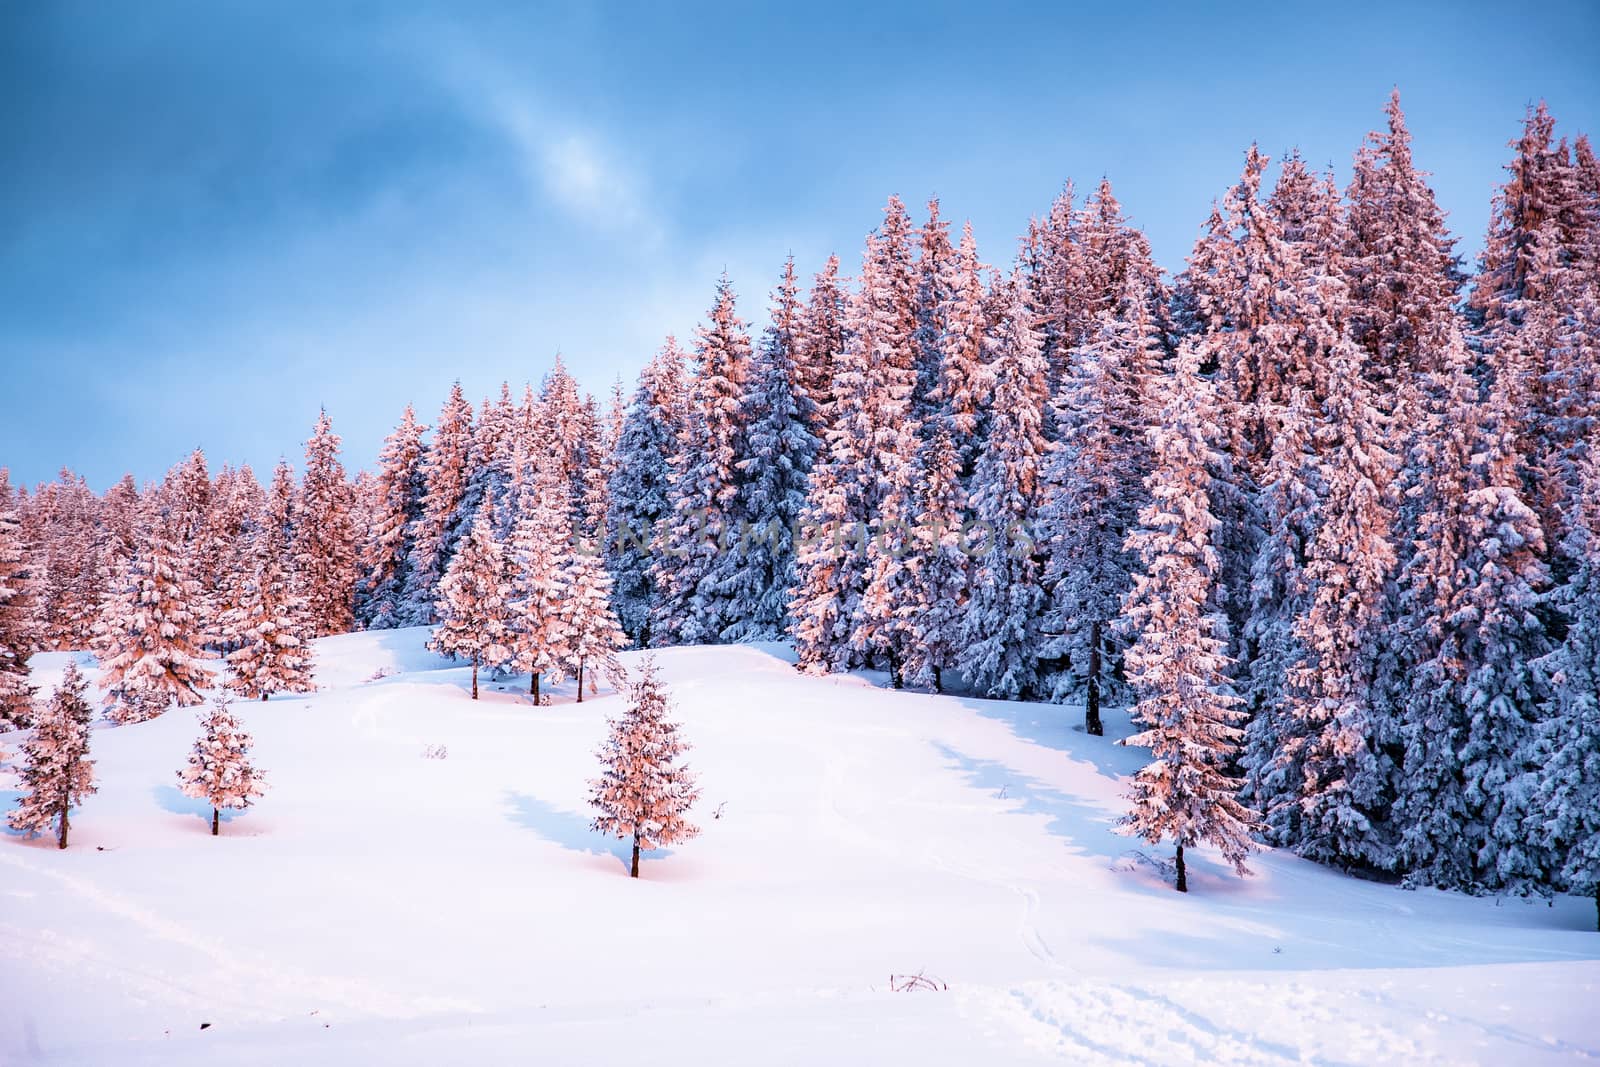 pink winter sunrise of snow covered firs - beautiful moutain landscape - Christmas backgrund